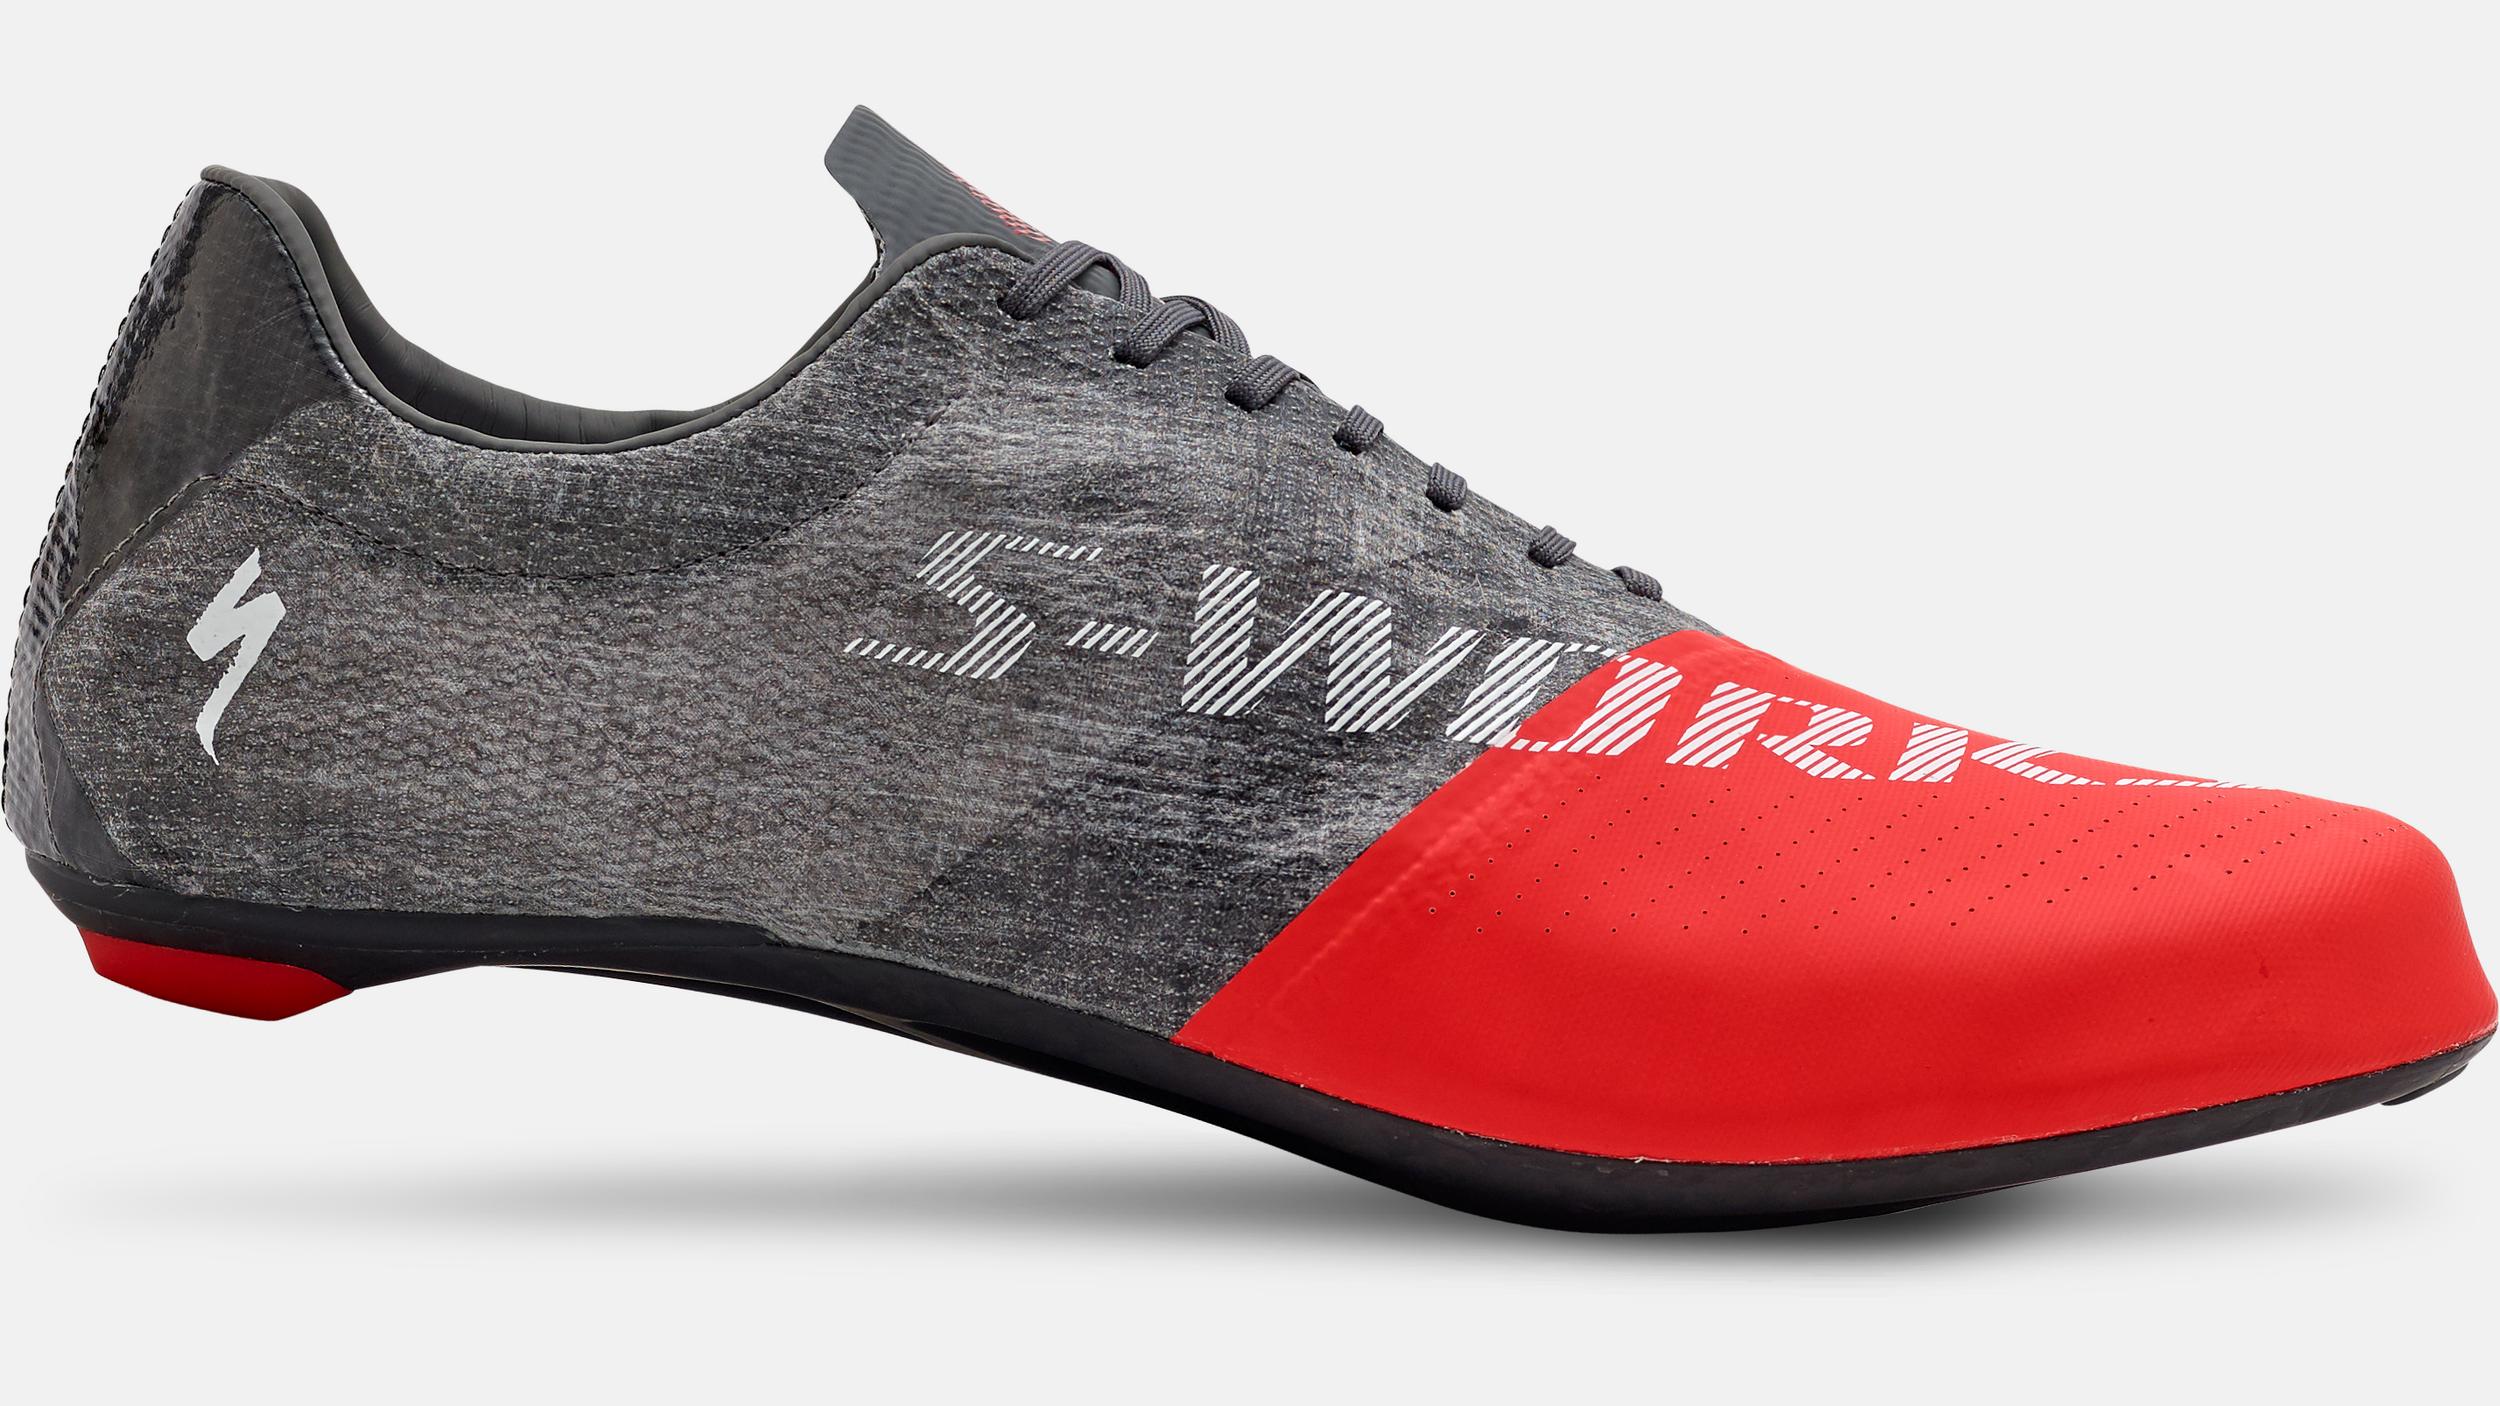 S-Works EXOS 99 Road Shoes – LTD | Specialized.com